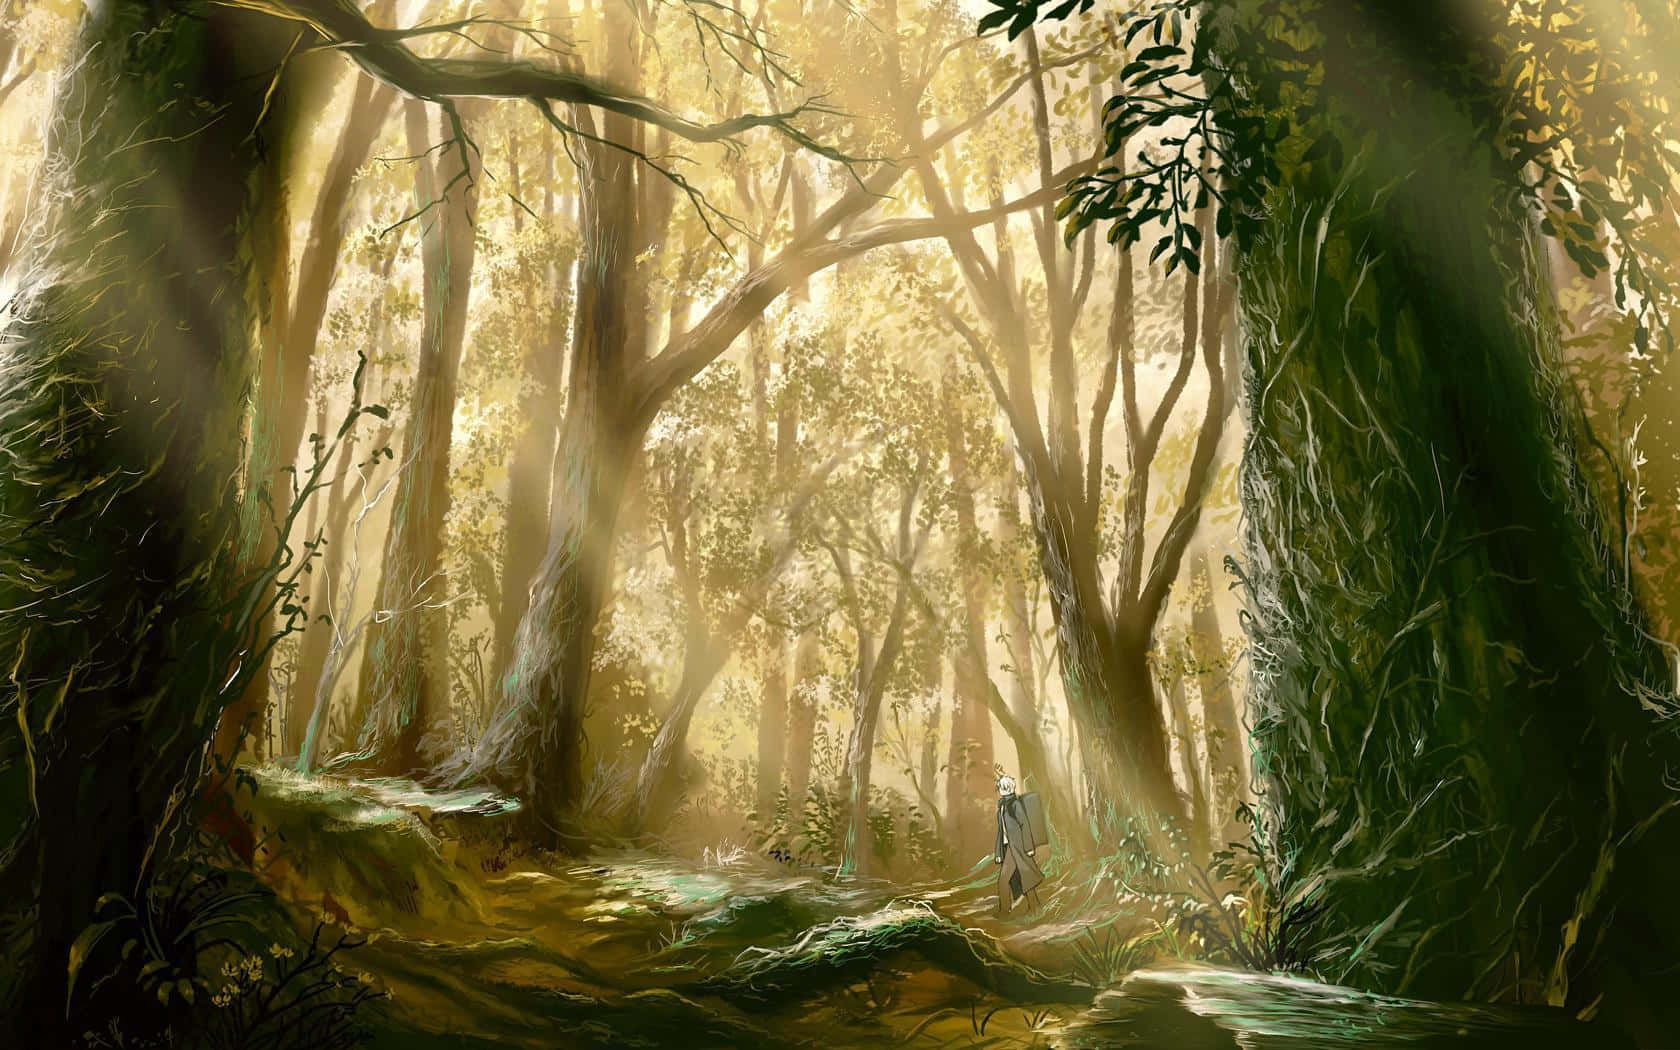 "Explore the mystical beauty of Anime Forest."